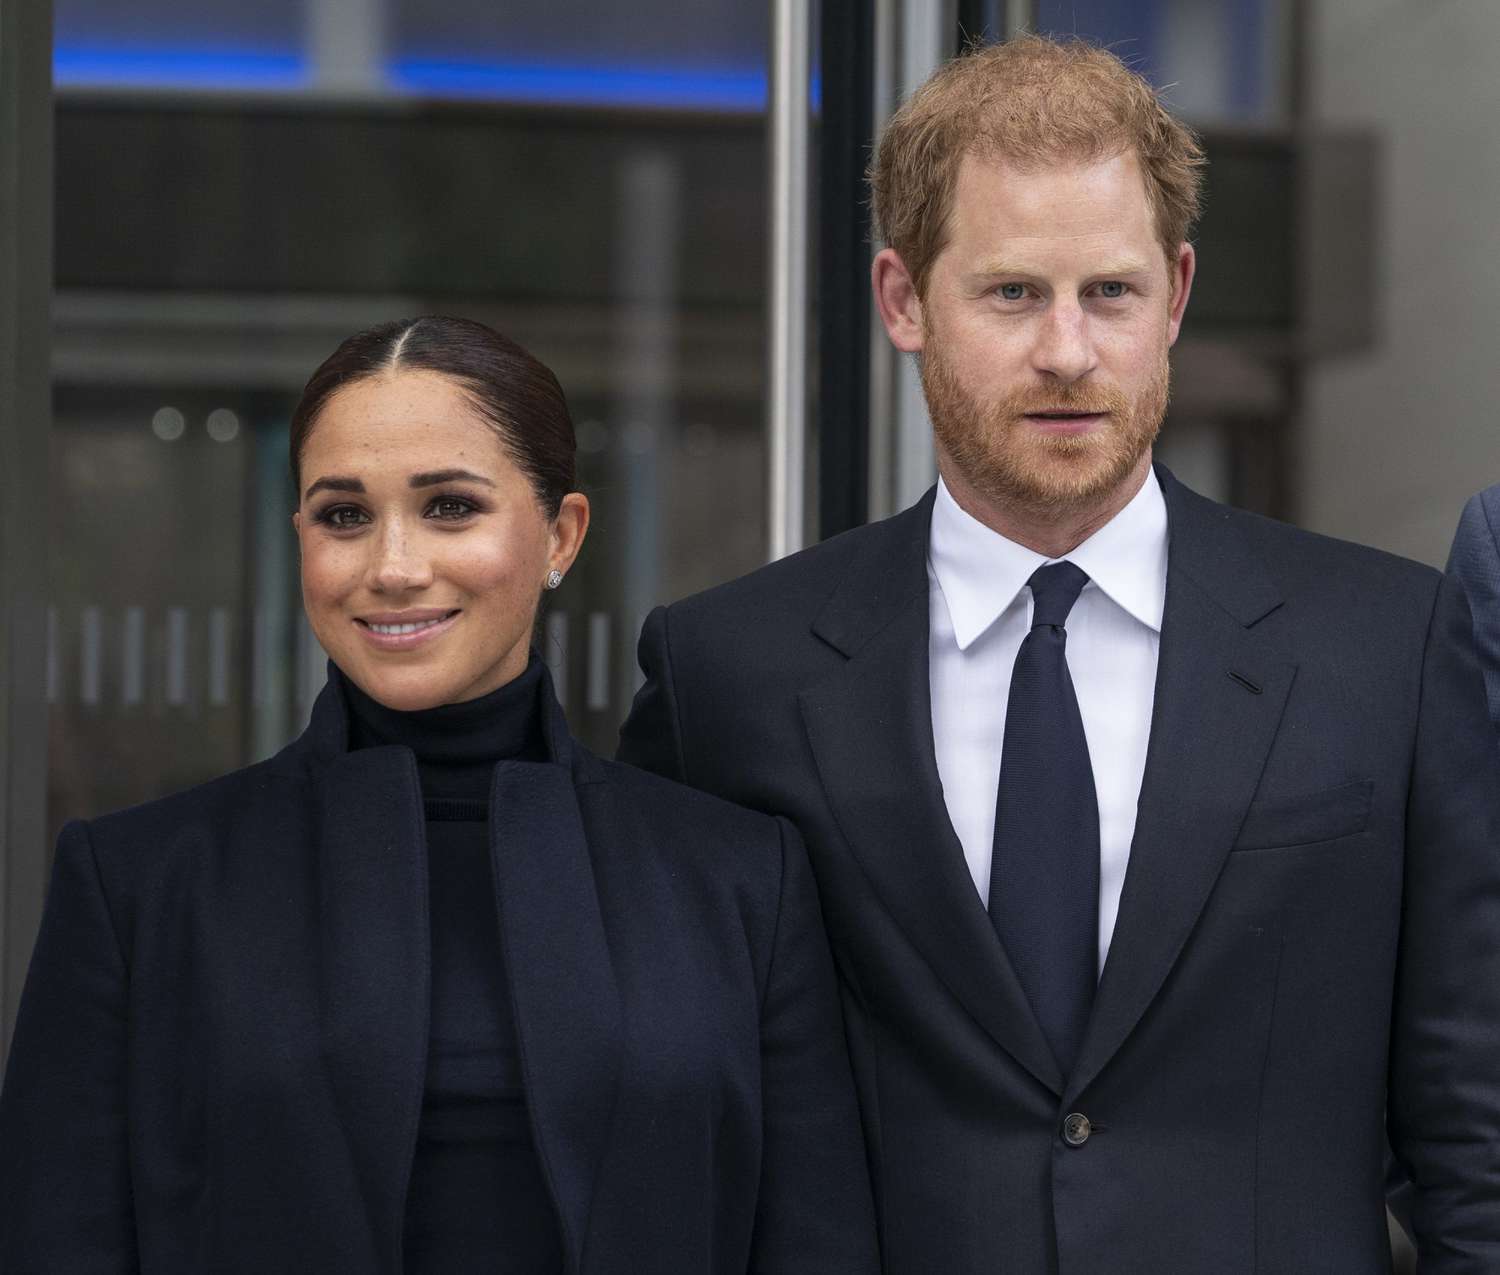 The Duke and Duchess of Sussex, Prince Harry and Meghan